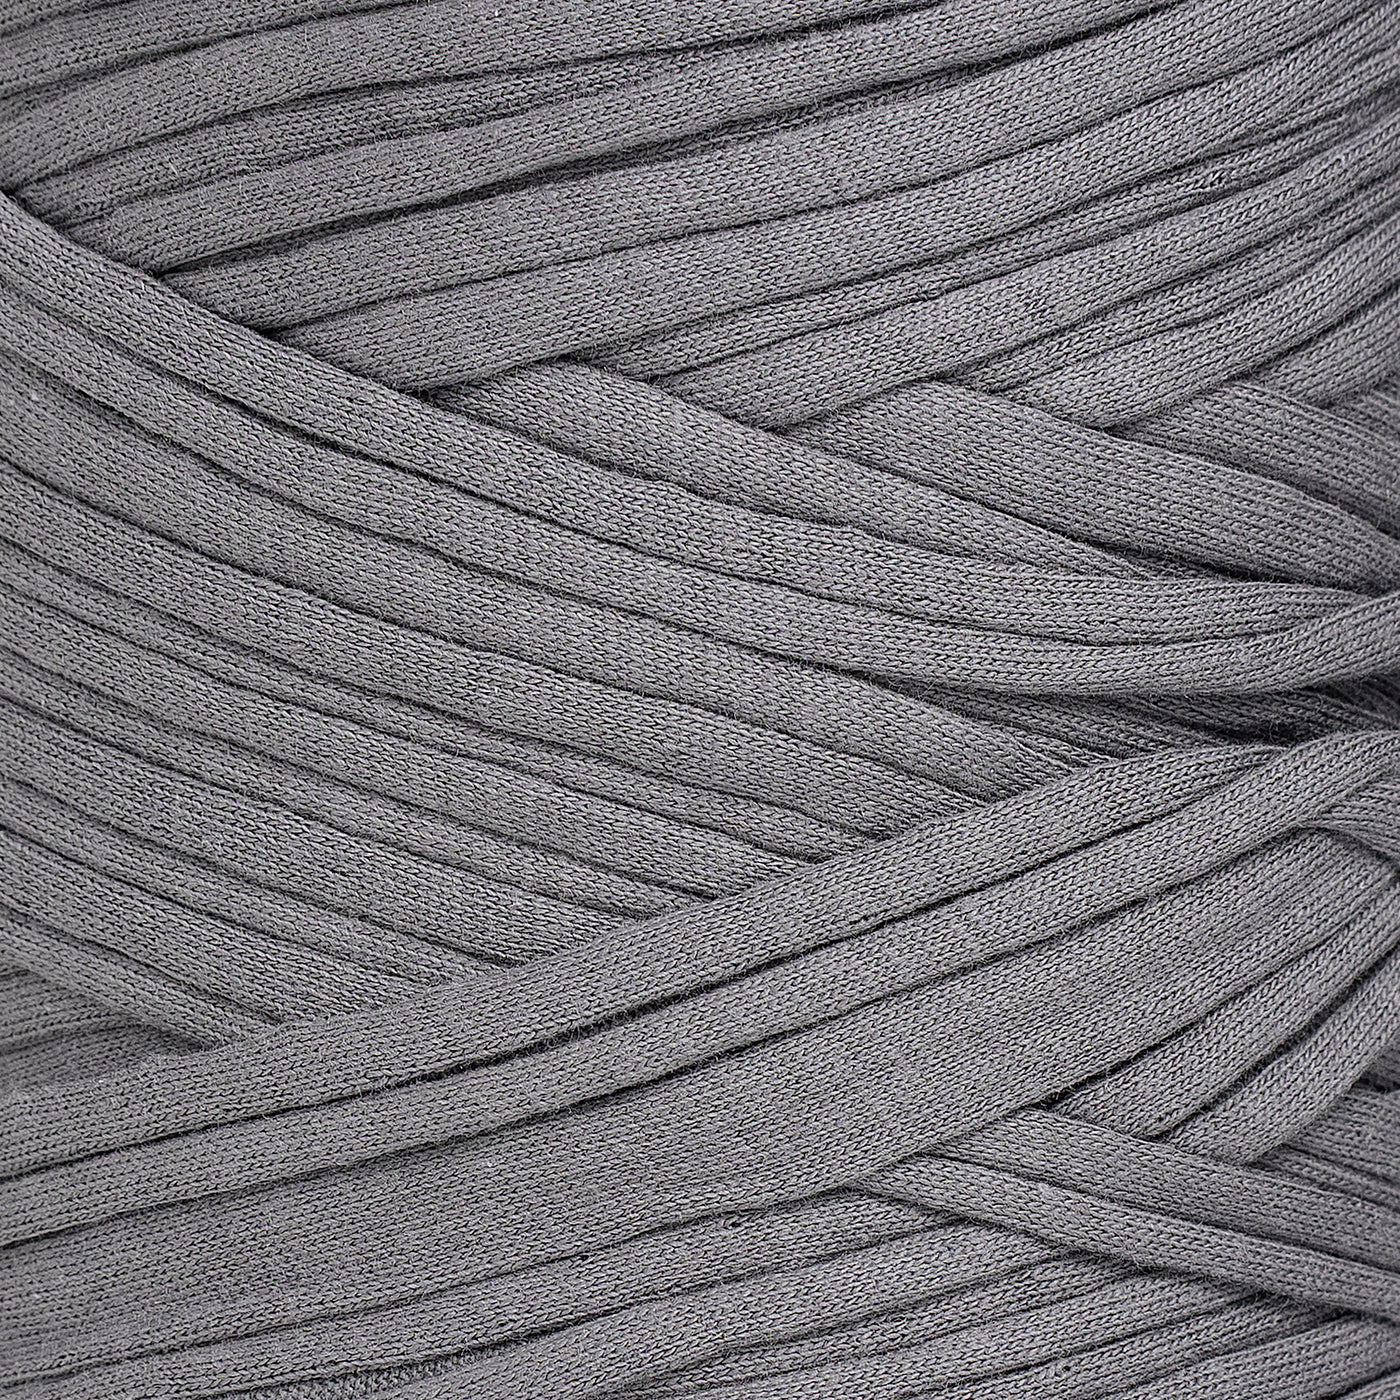 Recycled T-Shirt Fabric Yarn - Stone Gray Color